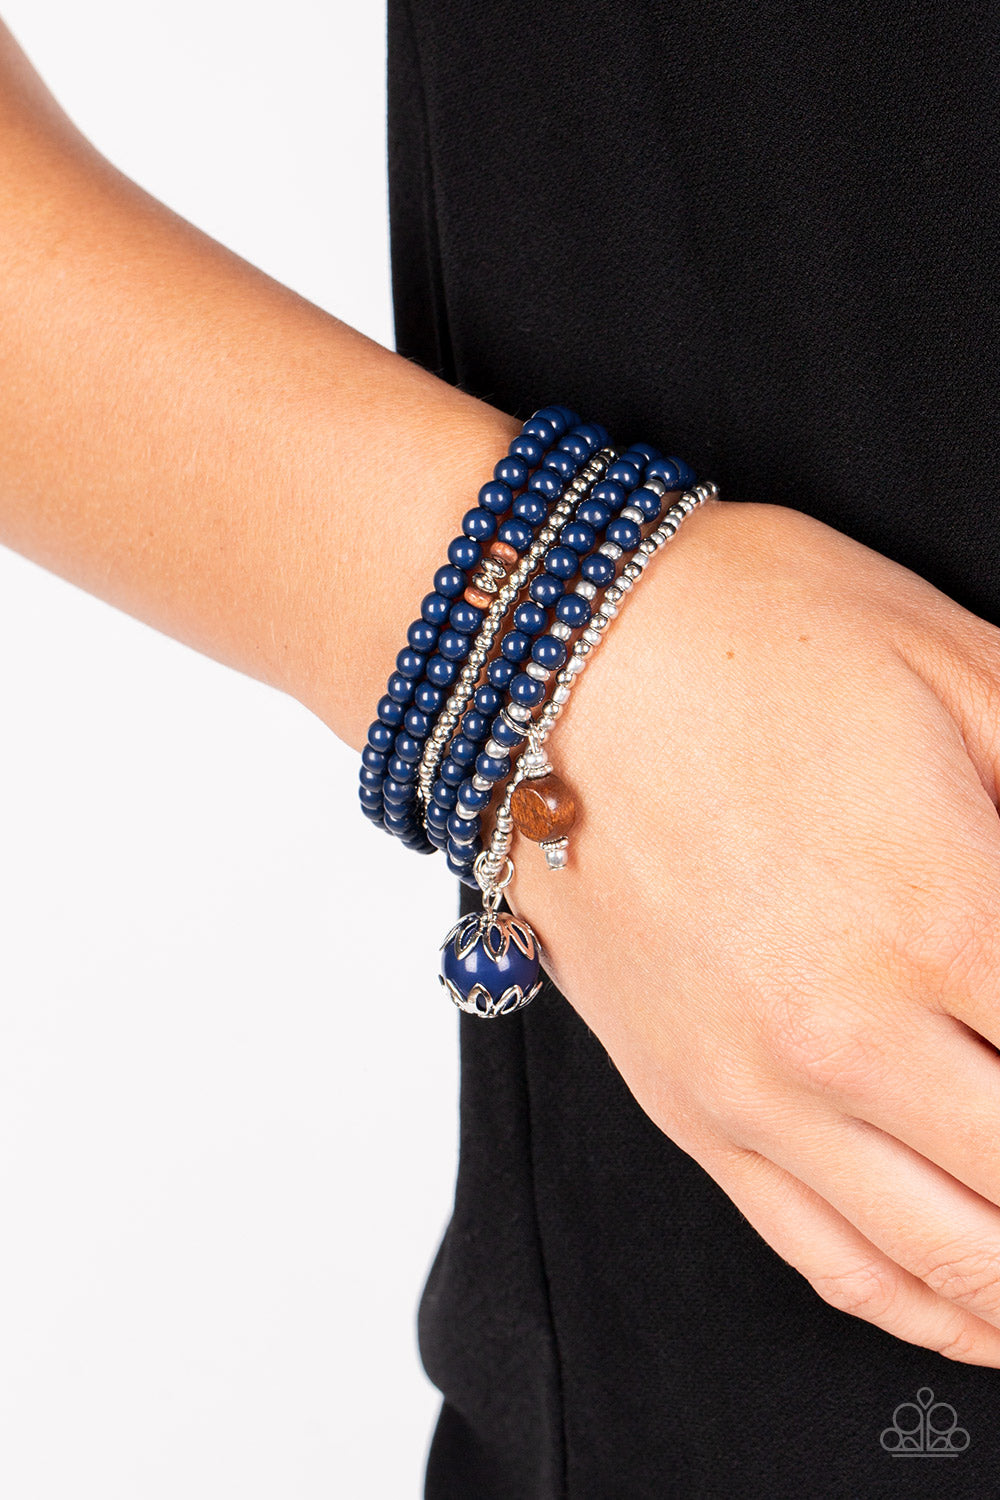 Epic Escapade Blue Bracelet - Paparazzi Accessories  A mismatched collection of silver, navy blue, and wooden beads are threaded along stretchy bands around the wrist. An ornate navy blue and wooden bead trickles from the layers, adding whimsical accents to the earthy display.  Sold as one set of six bracelets.  P9SE-BLXX-416XX